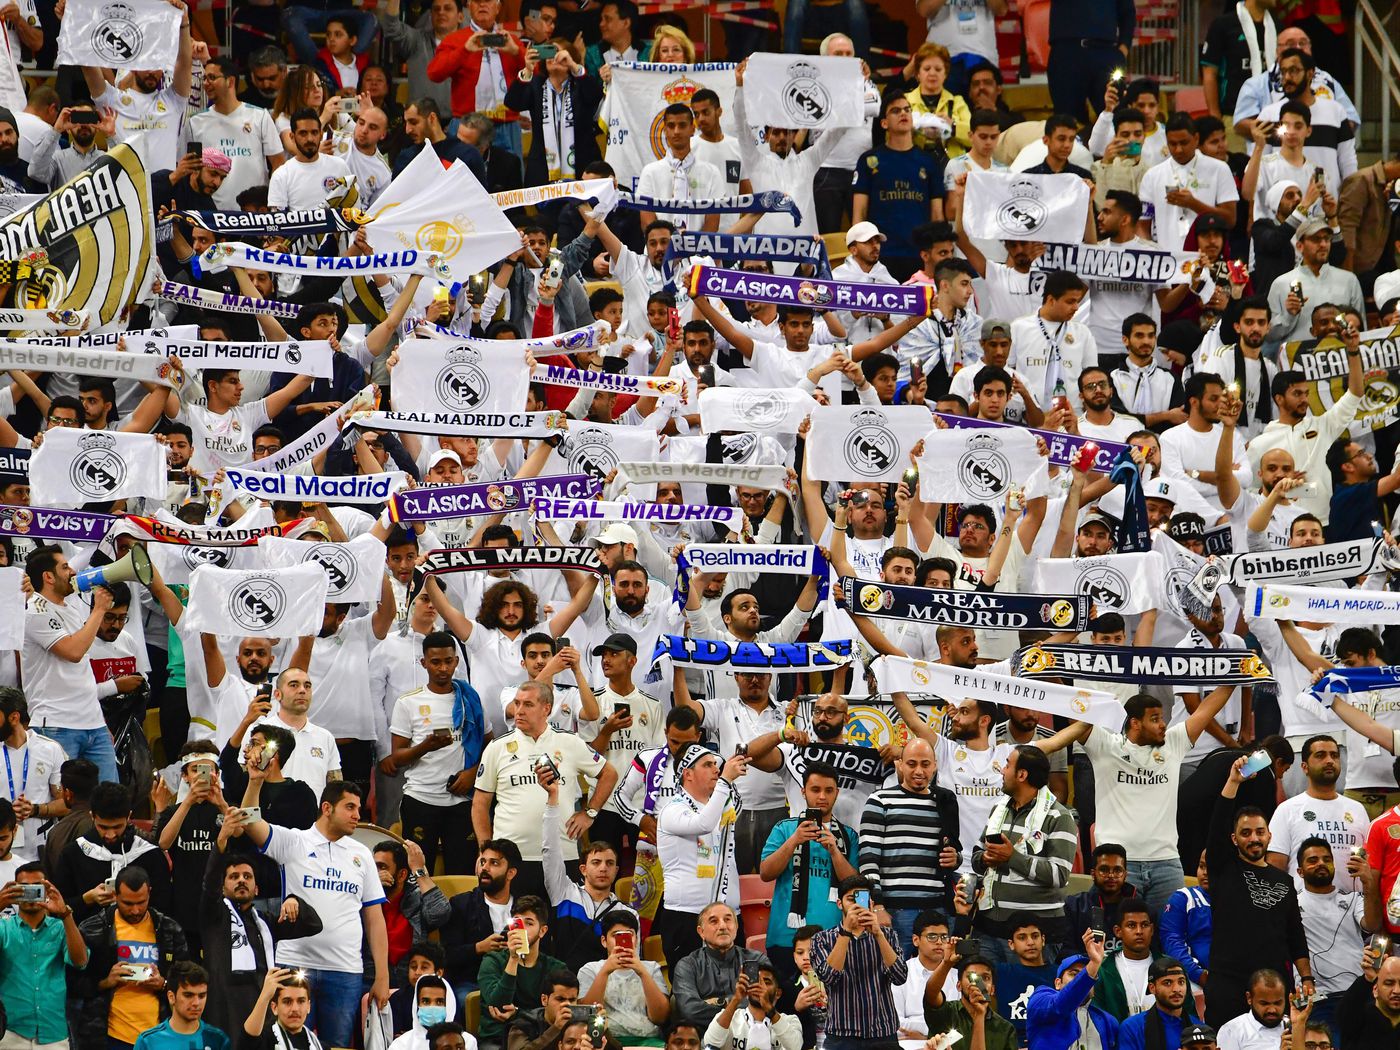 Why Real Madrid peñas are more than just fan clubs